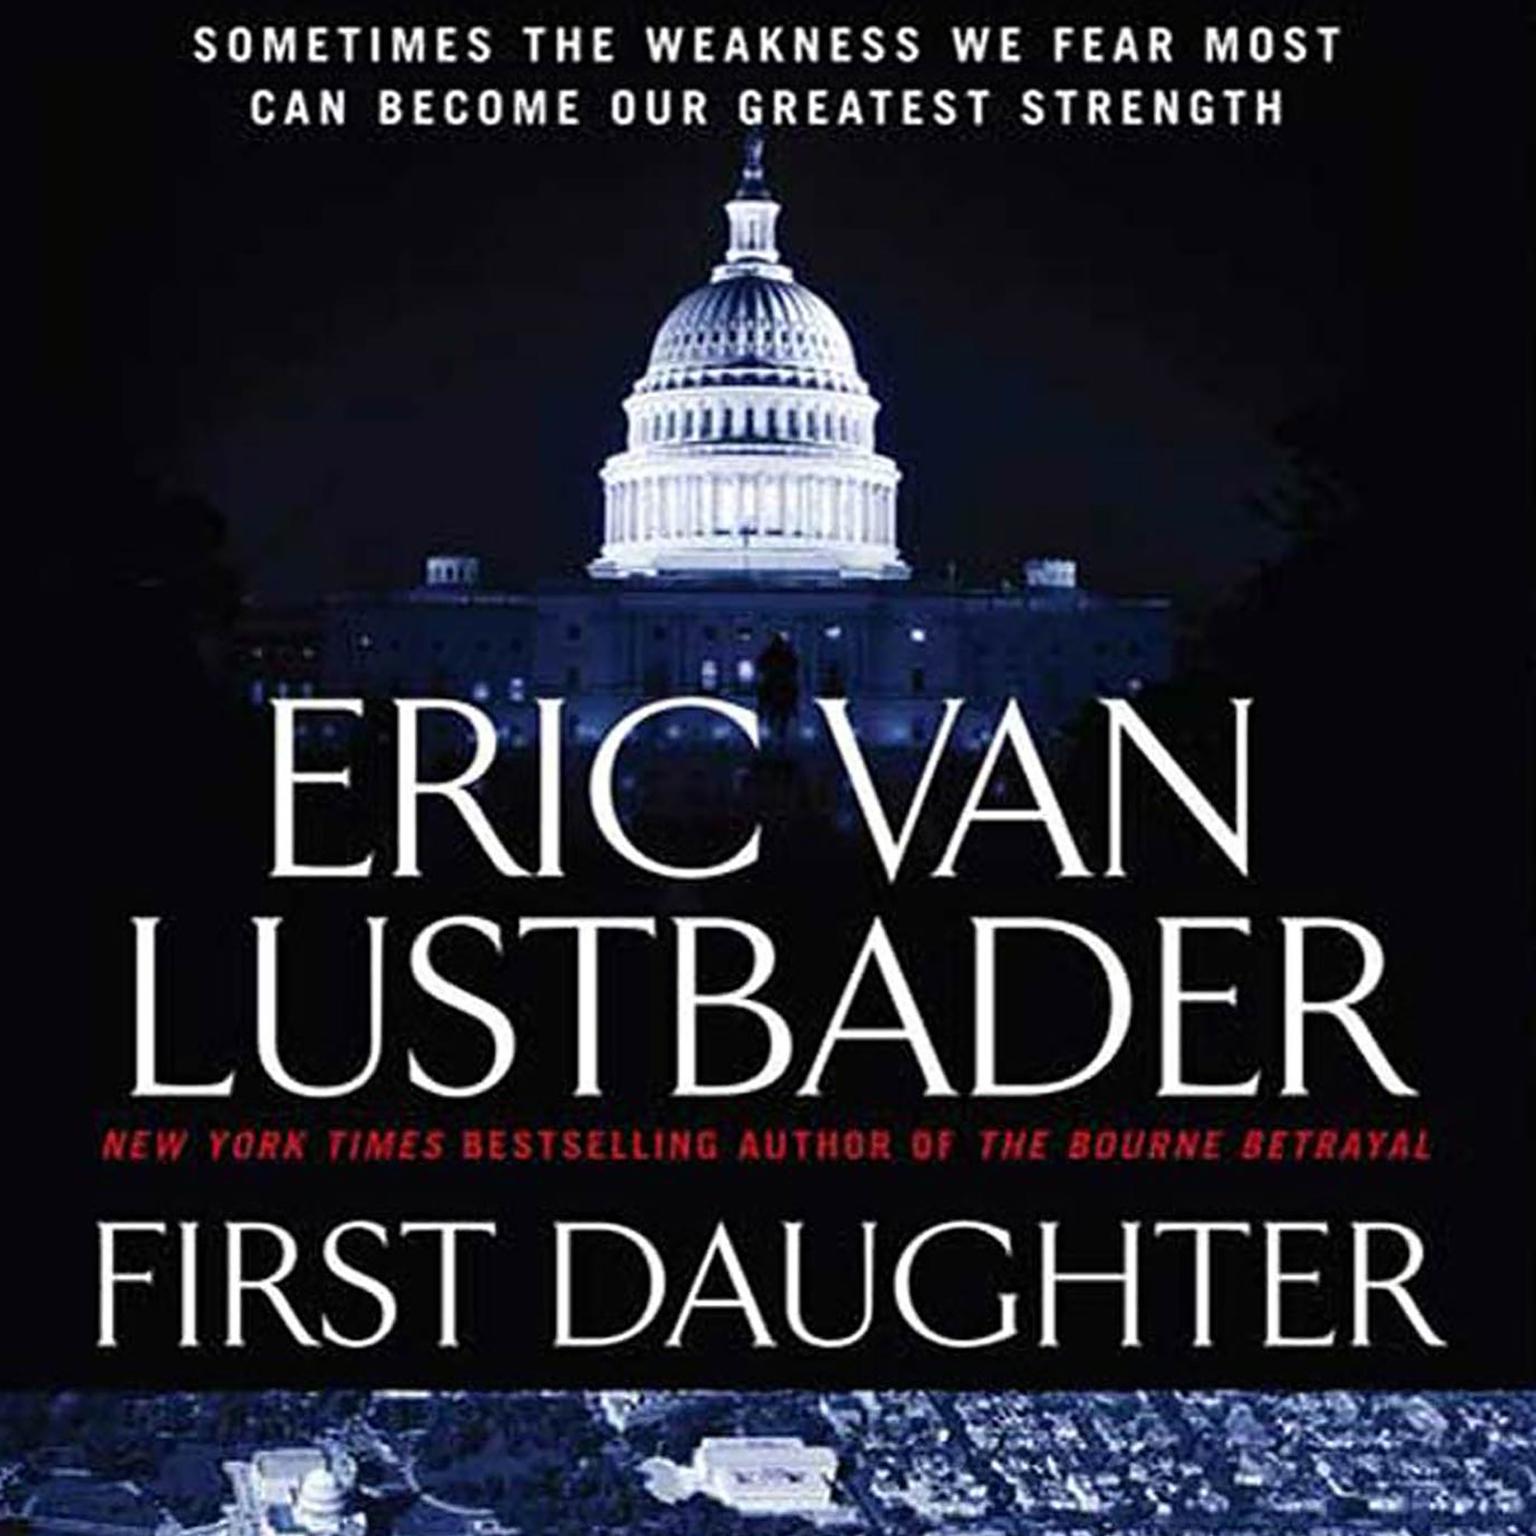 First Daughter (Abridged): A McClure/Carson Novel Audiobook, by Eric Van Lustbader